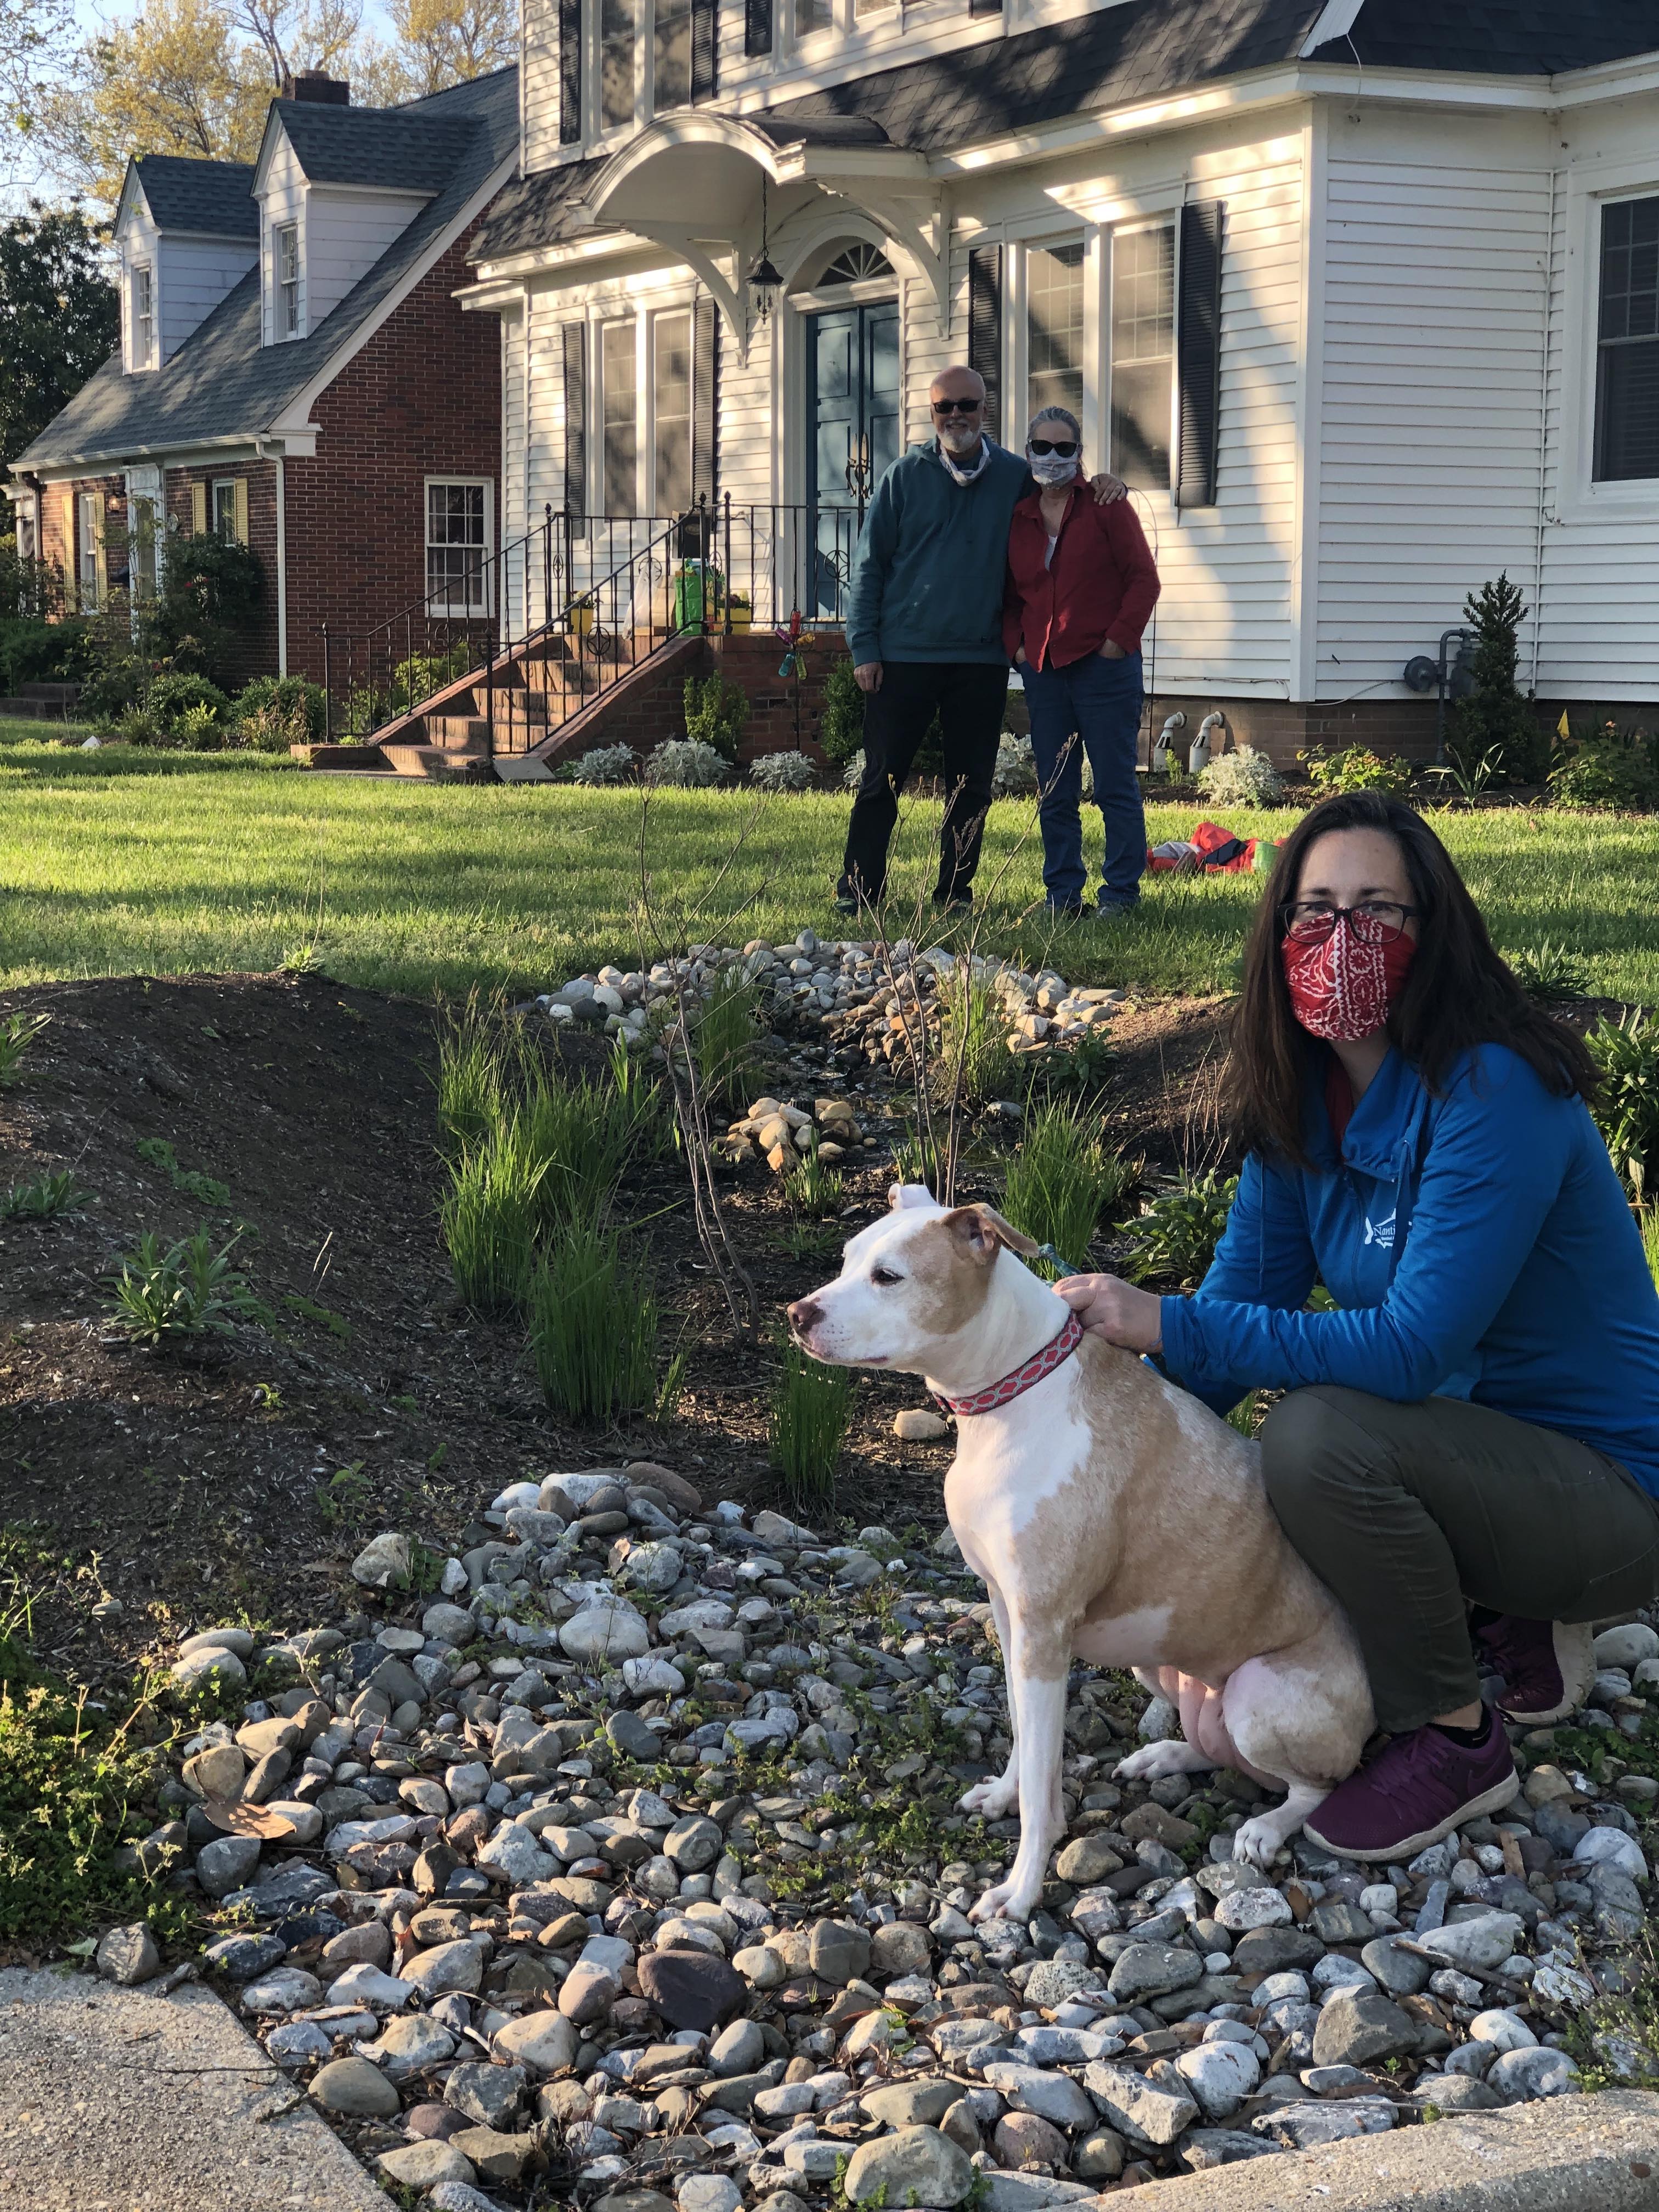 Lisa Wool kneels in the foreground with a medium size brown and white dog at the edge of a rain garden while a couple stands in the background, in their yard in front of a white house